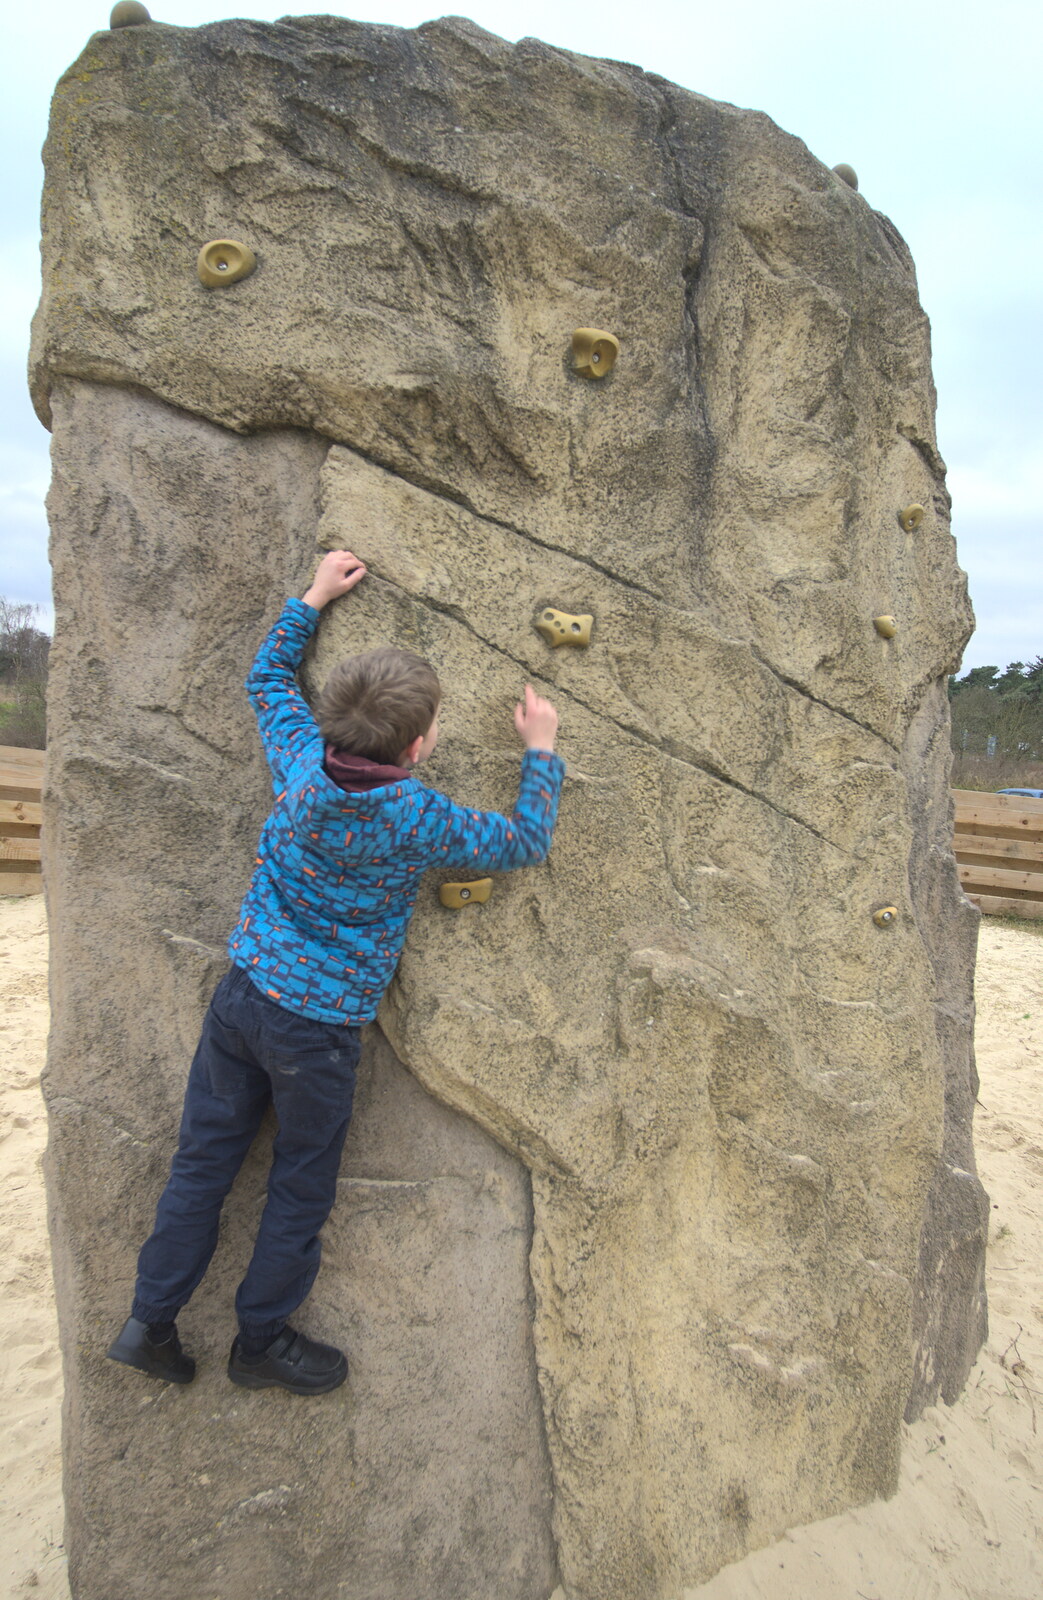 Fred clings to a climbing wall from An Anglo-Saxon Village, West Stow, Suffolk - 19th February 2017